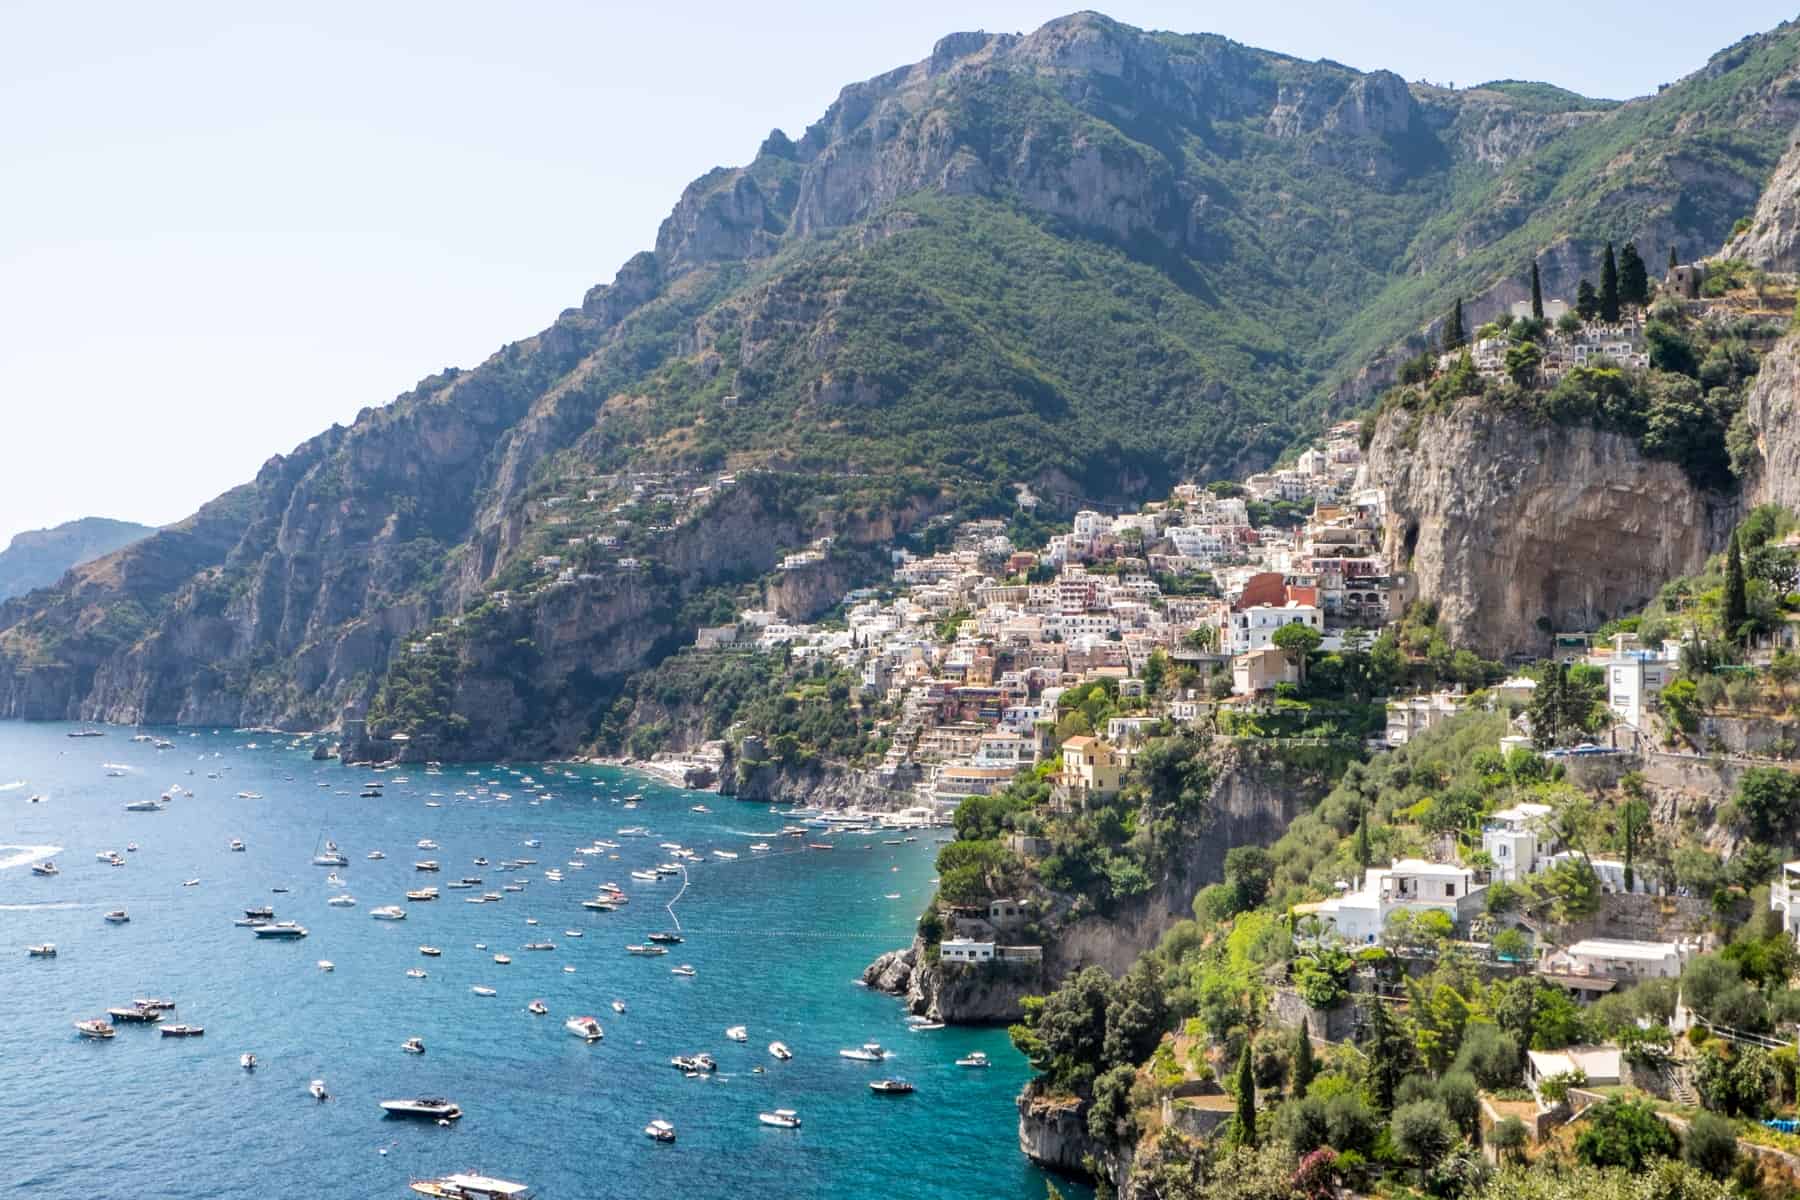 An elevated, distant view of the colourful cluster of houses of Positano town on the mountainous Amalfi Coast. 